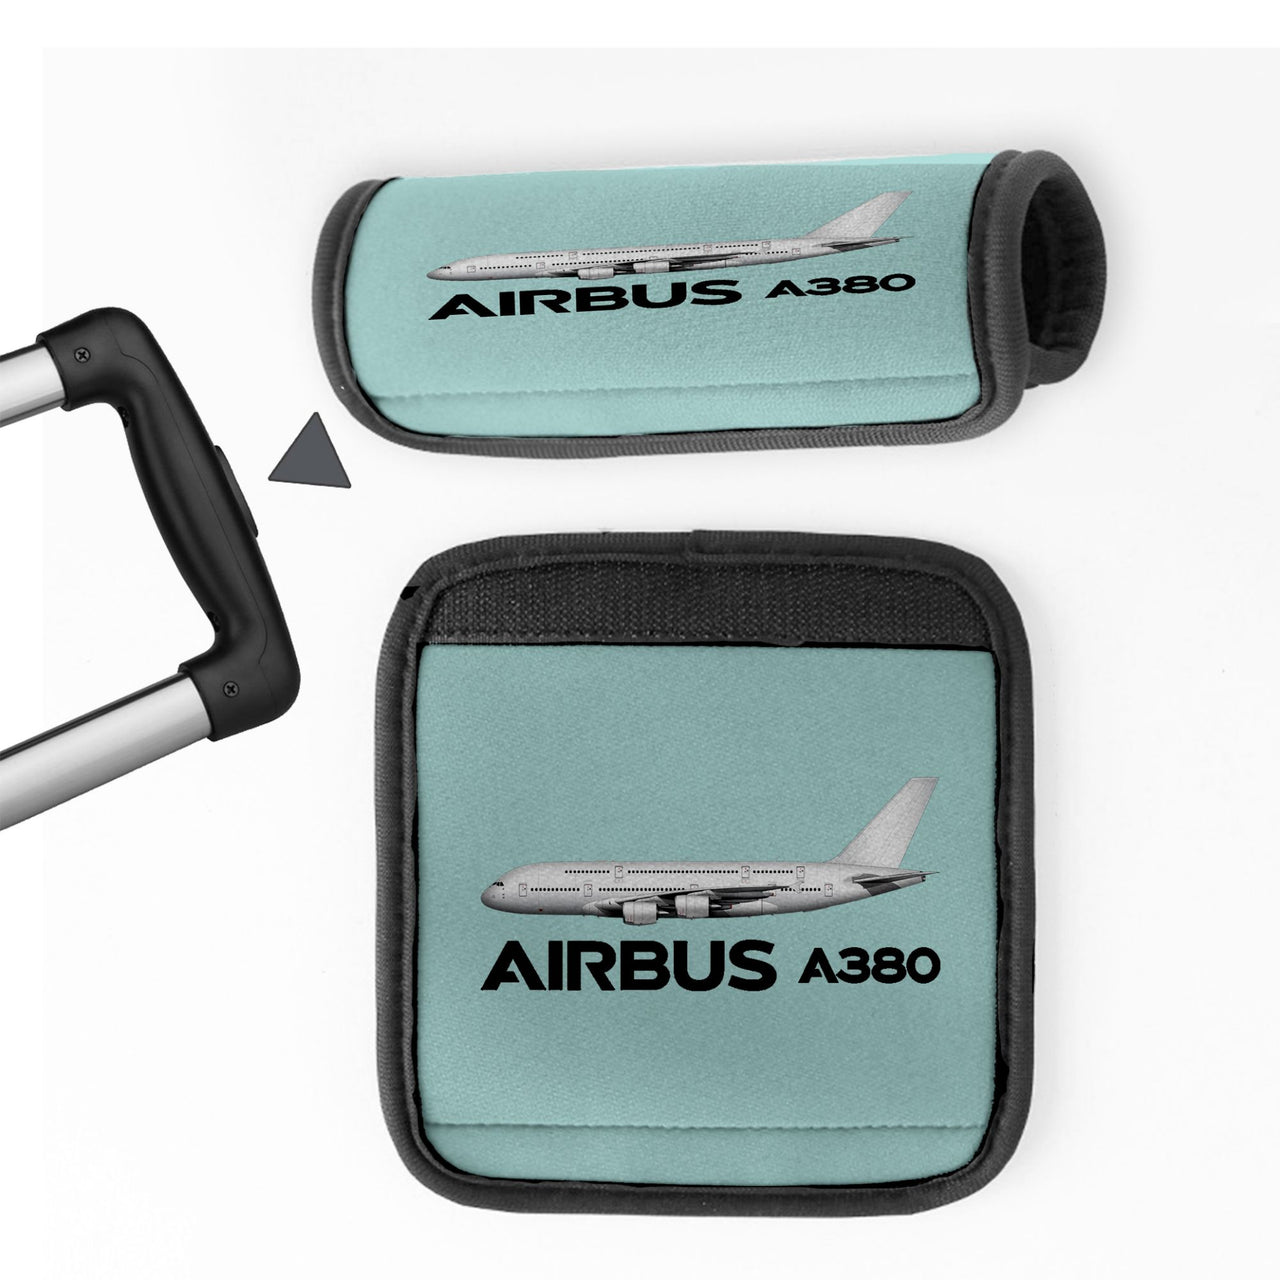 The Airbus A380 Designed Neoprene Luggage Handle Covers